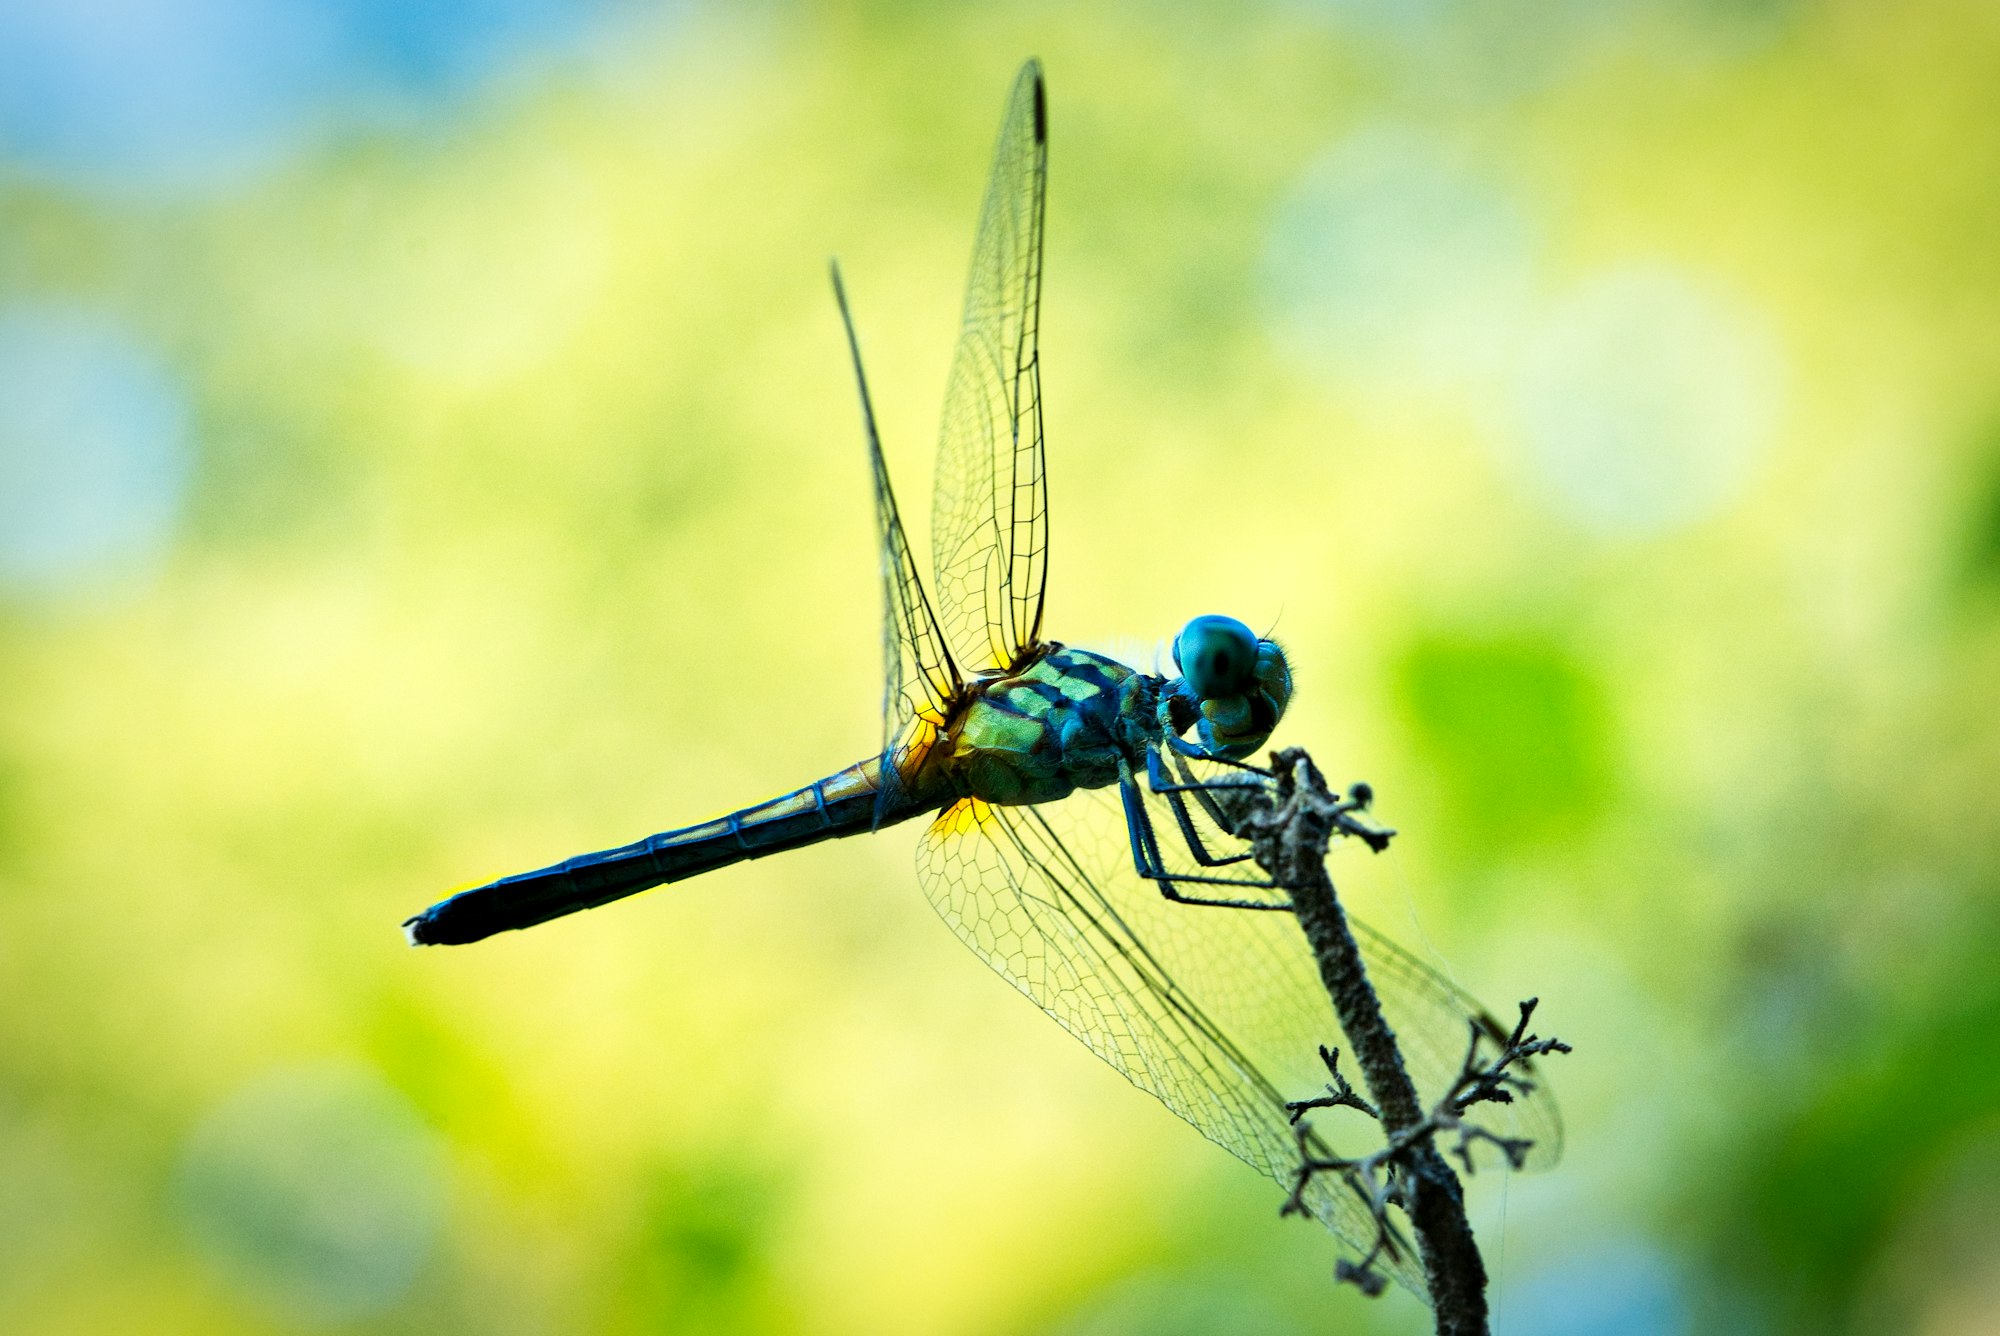 A pic of a dragon fly perched on a limb.